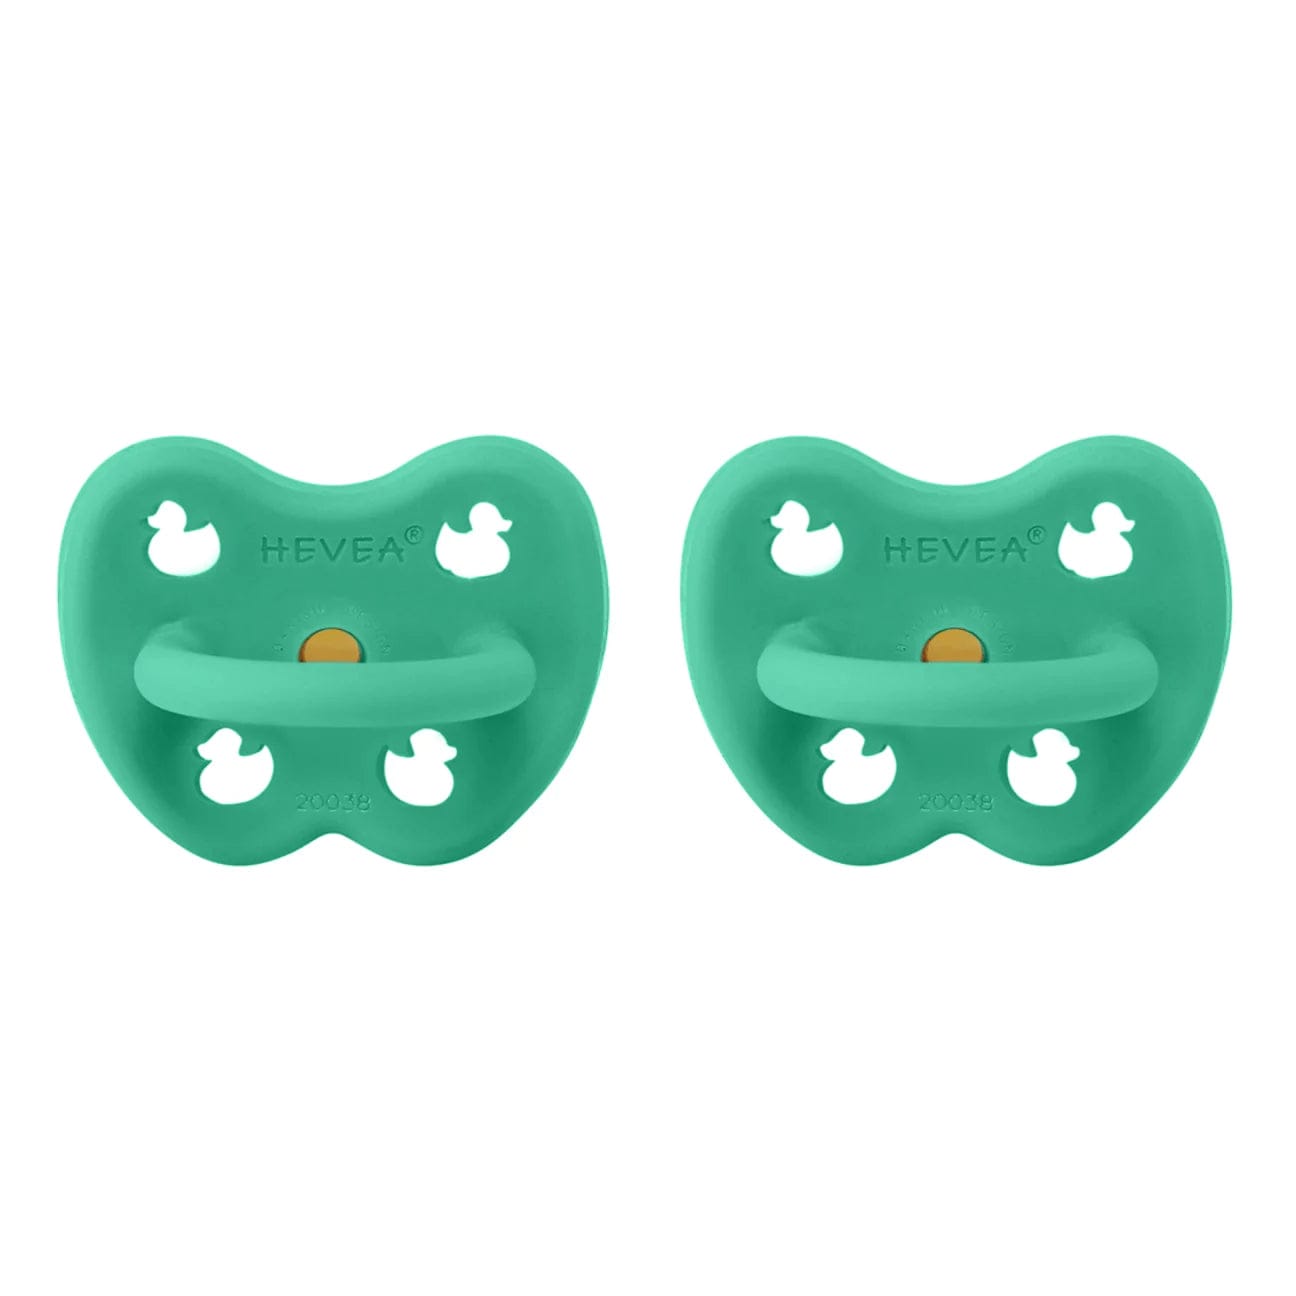 Pop of Green Round Pacifier 2 Pack (3-36 Months) Hevea Hevea Lil Tulips